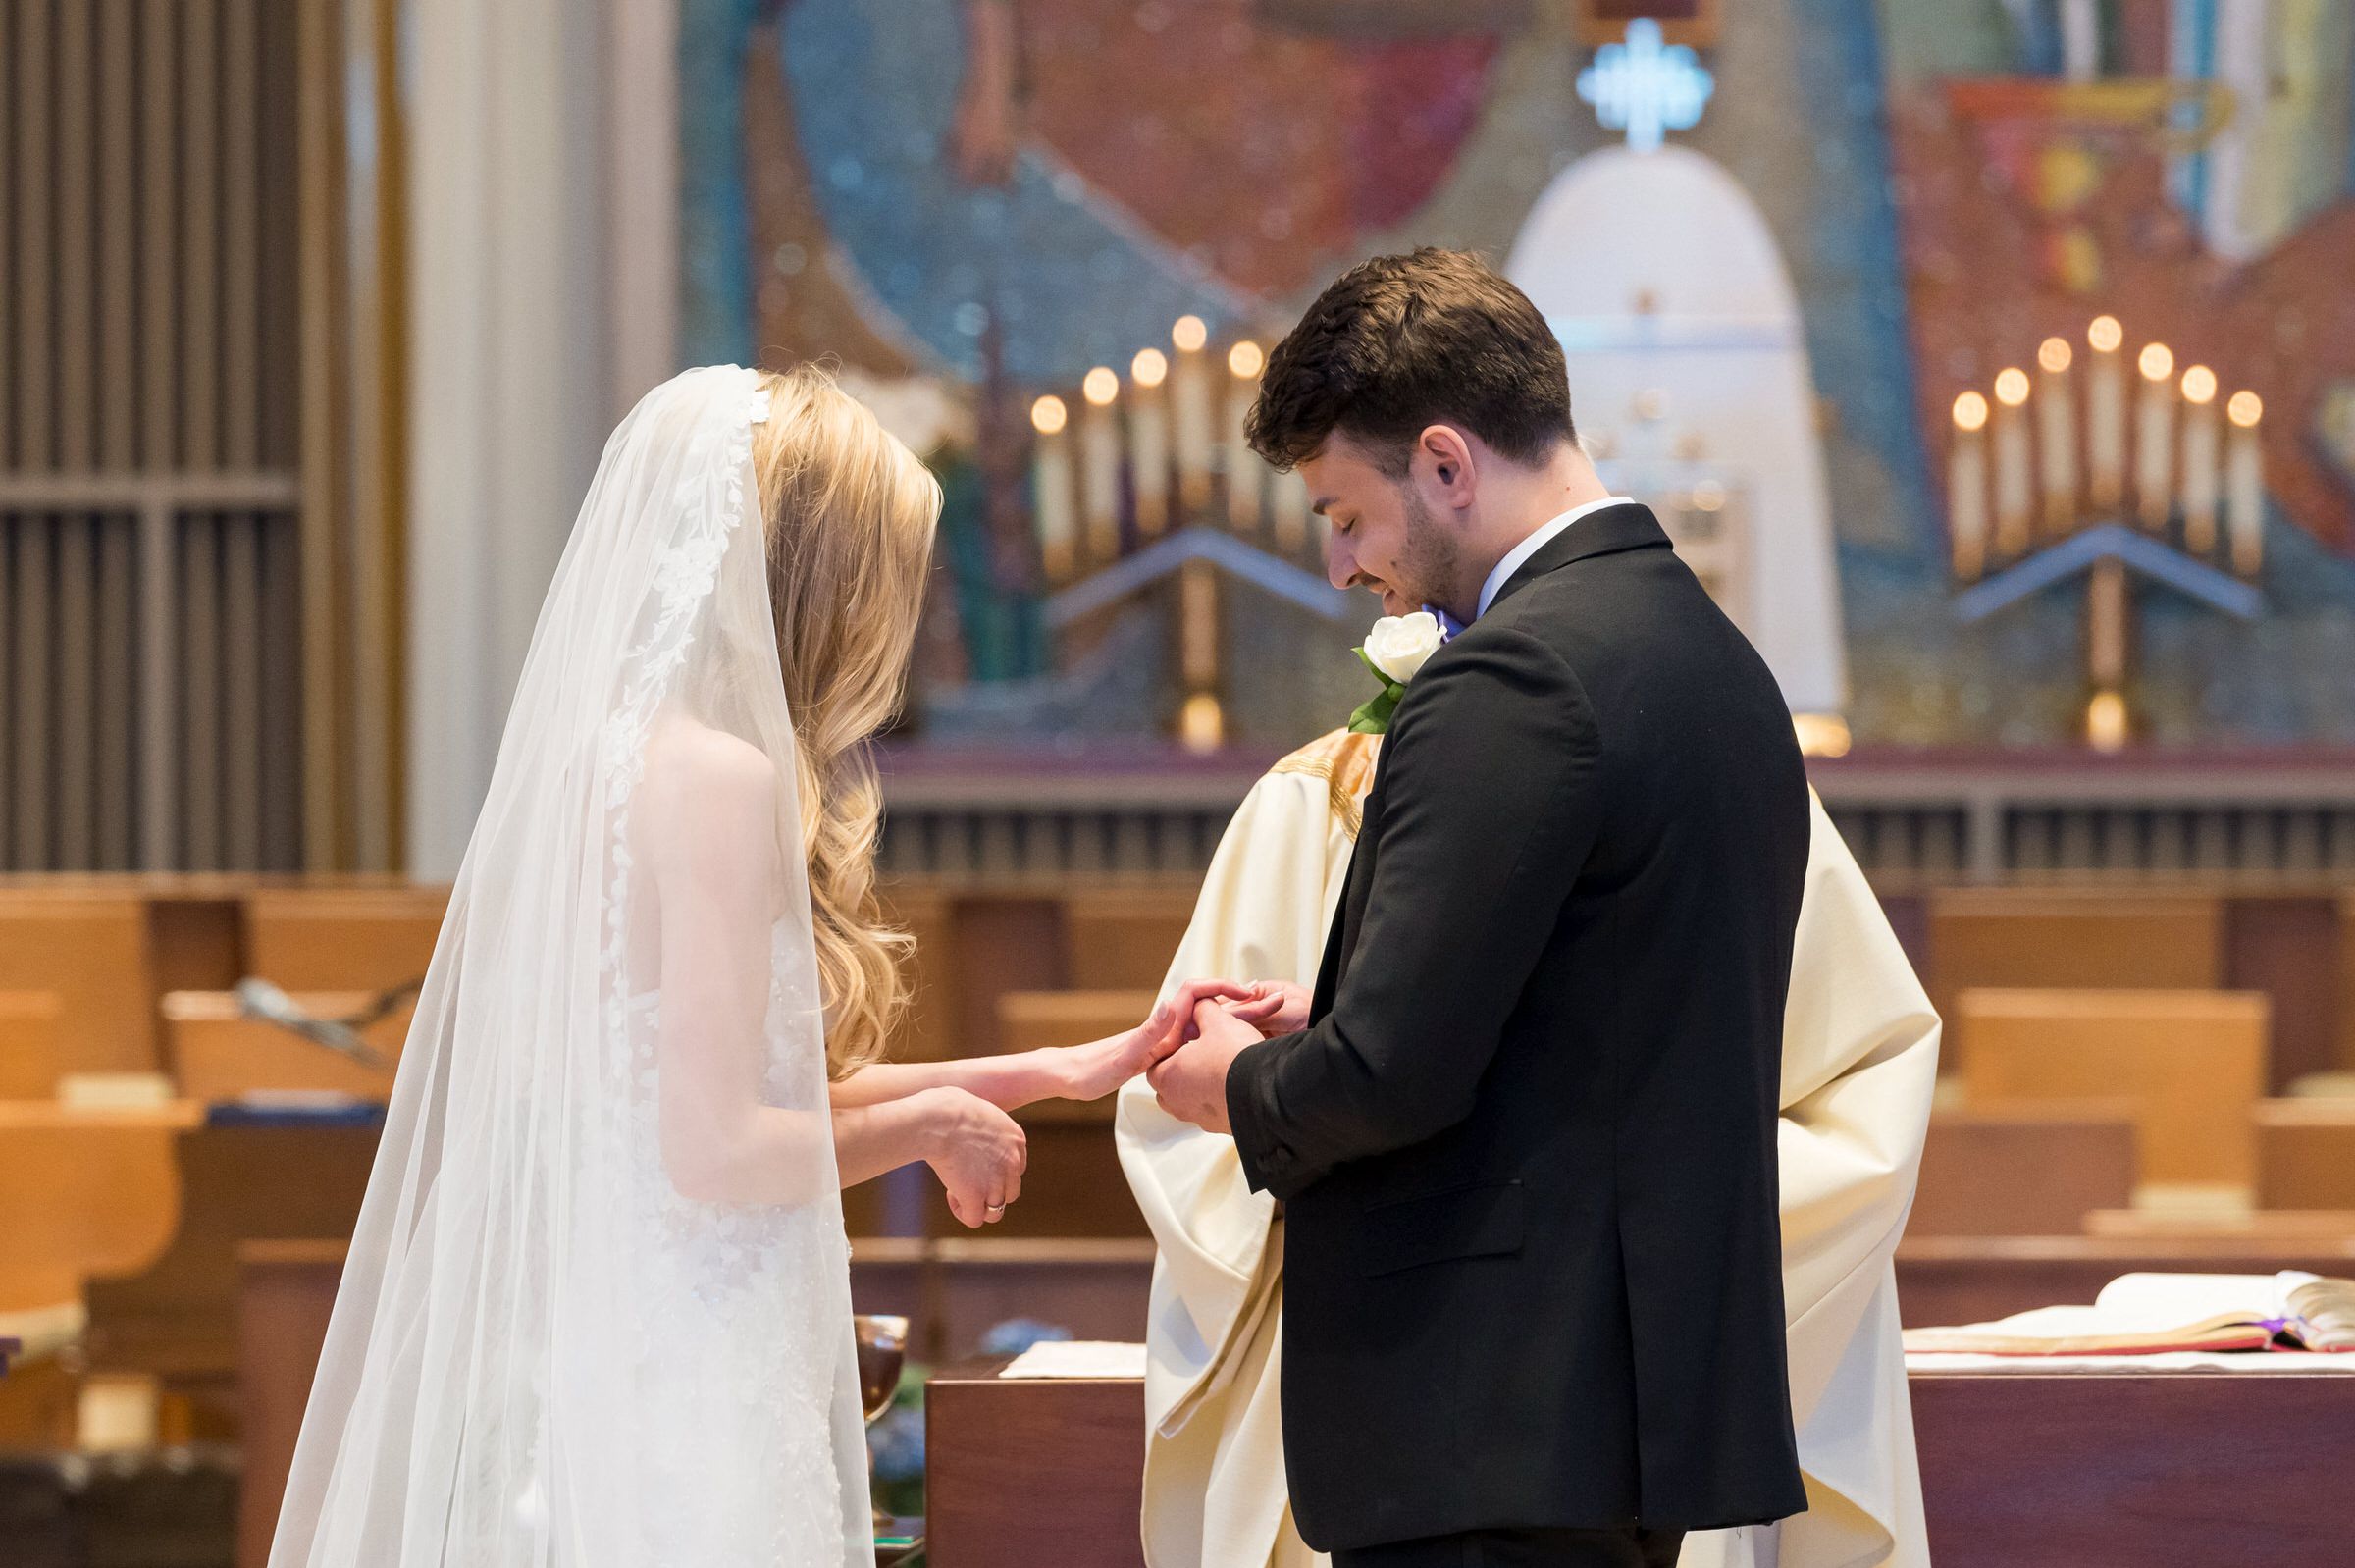 Vows and rings are exchanged at a Holy Name Catholic Church wedding.  